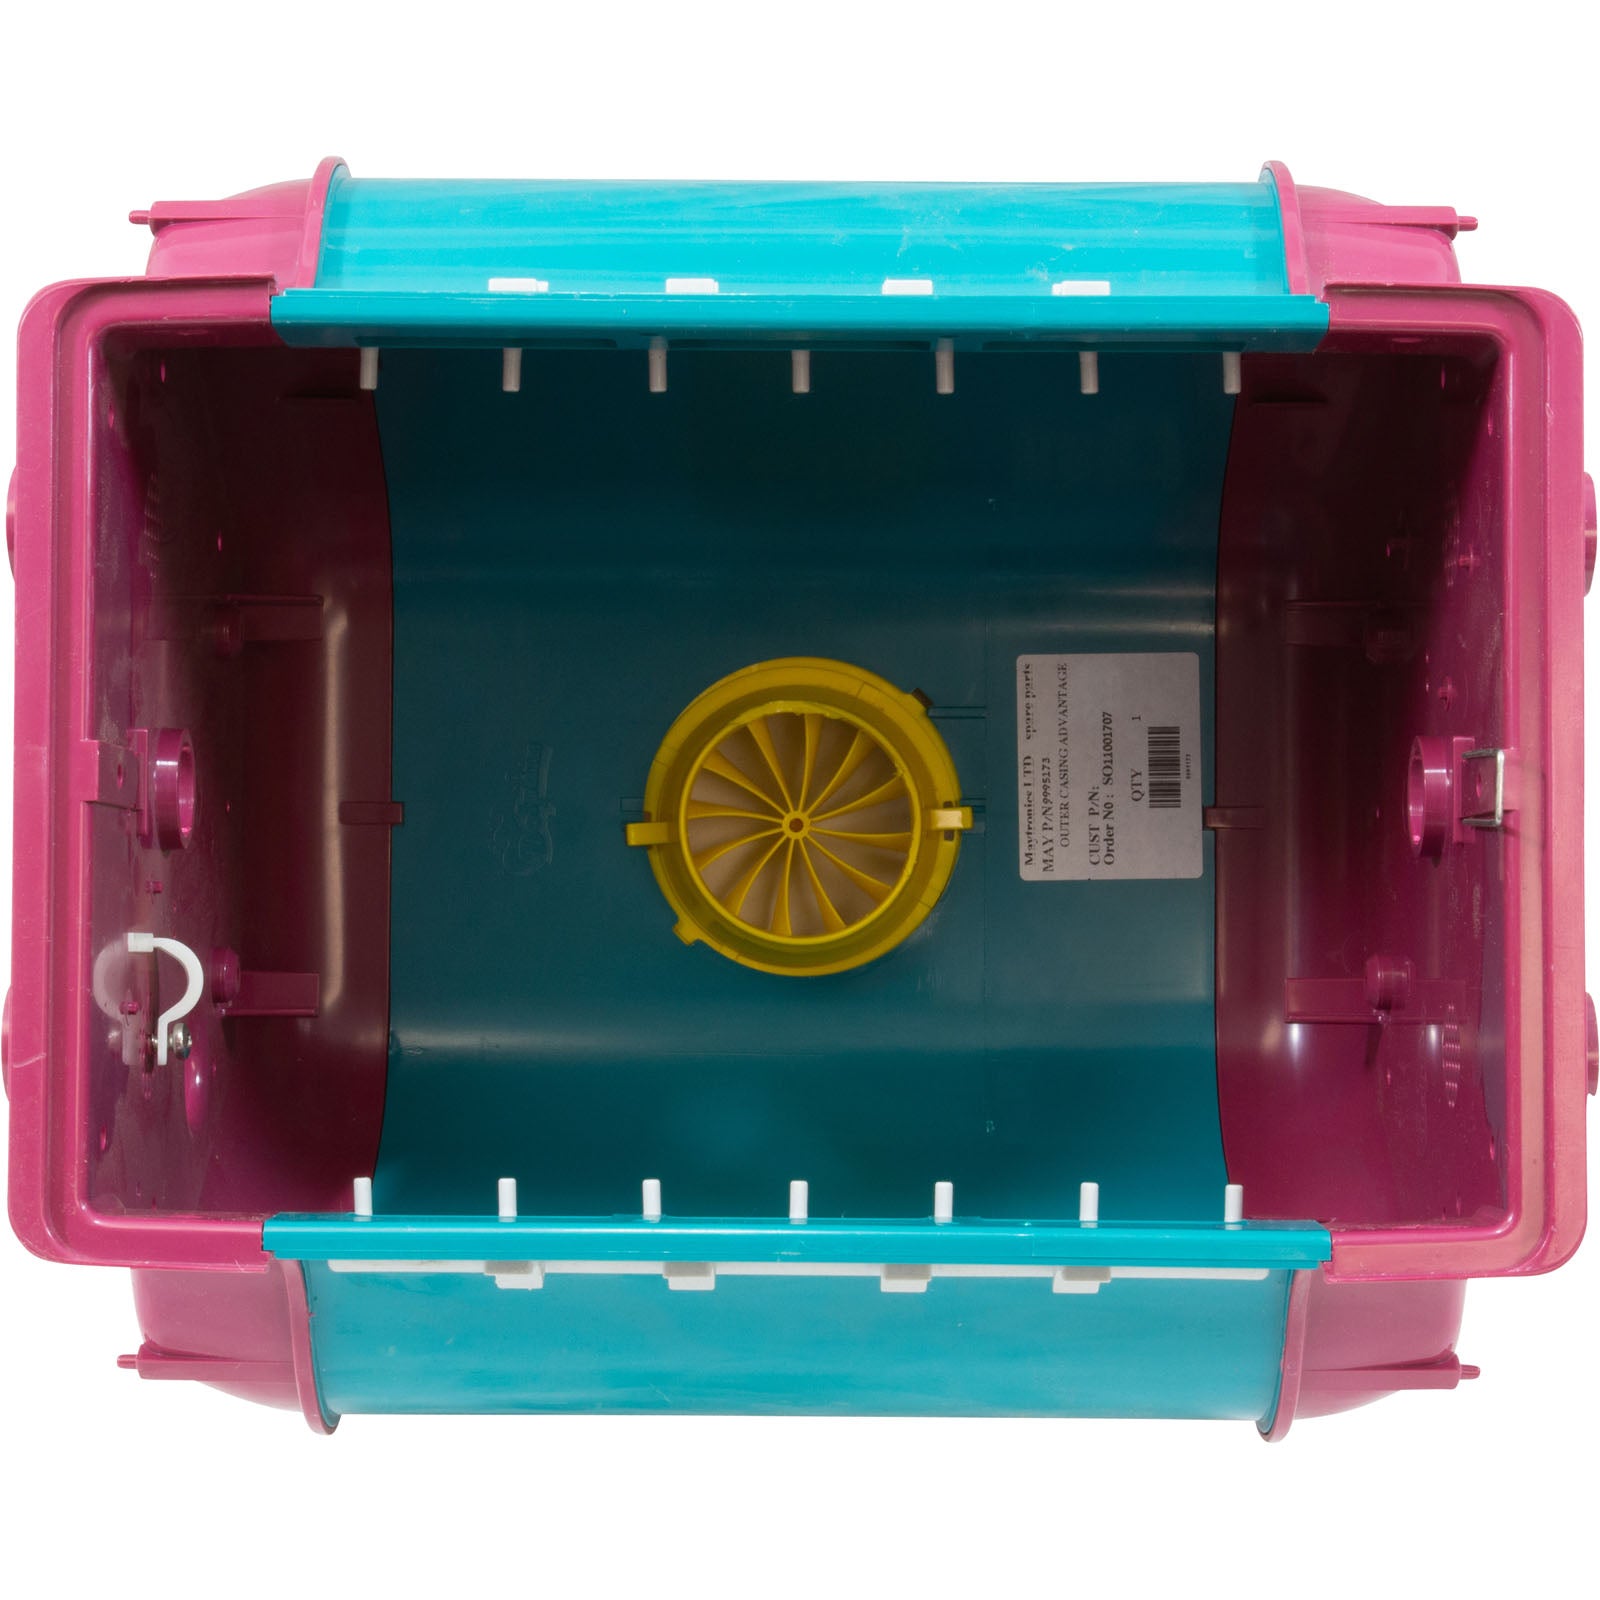 Outer Casing, Turquoise and Magenta, Maytronics 9995173